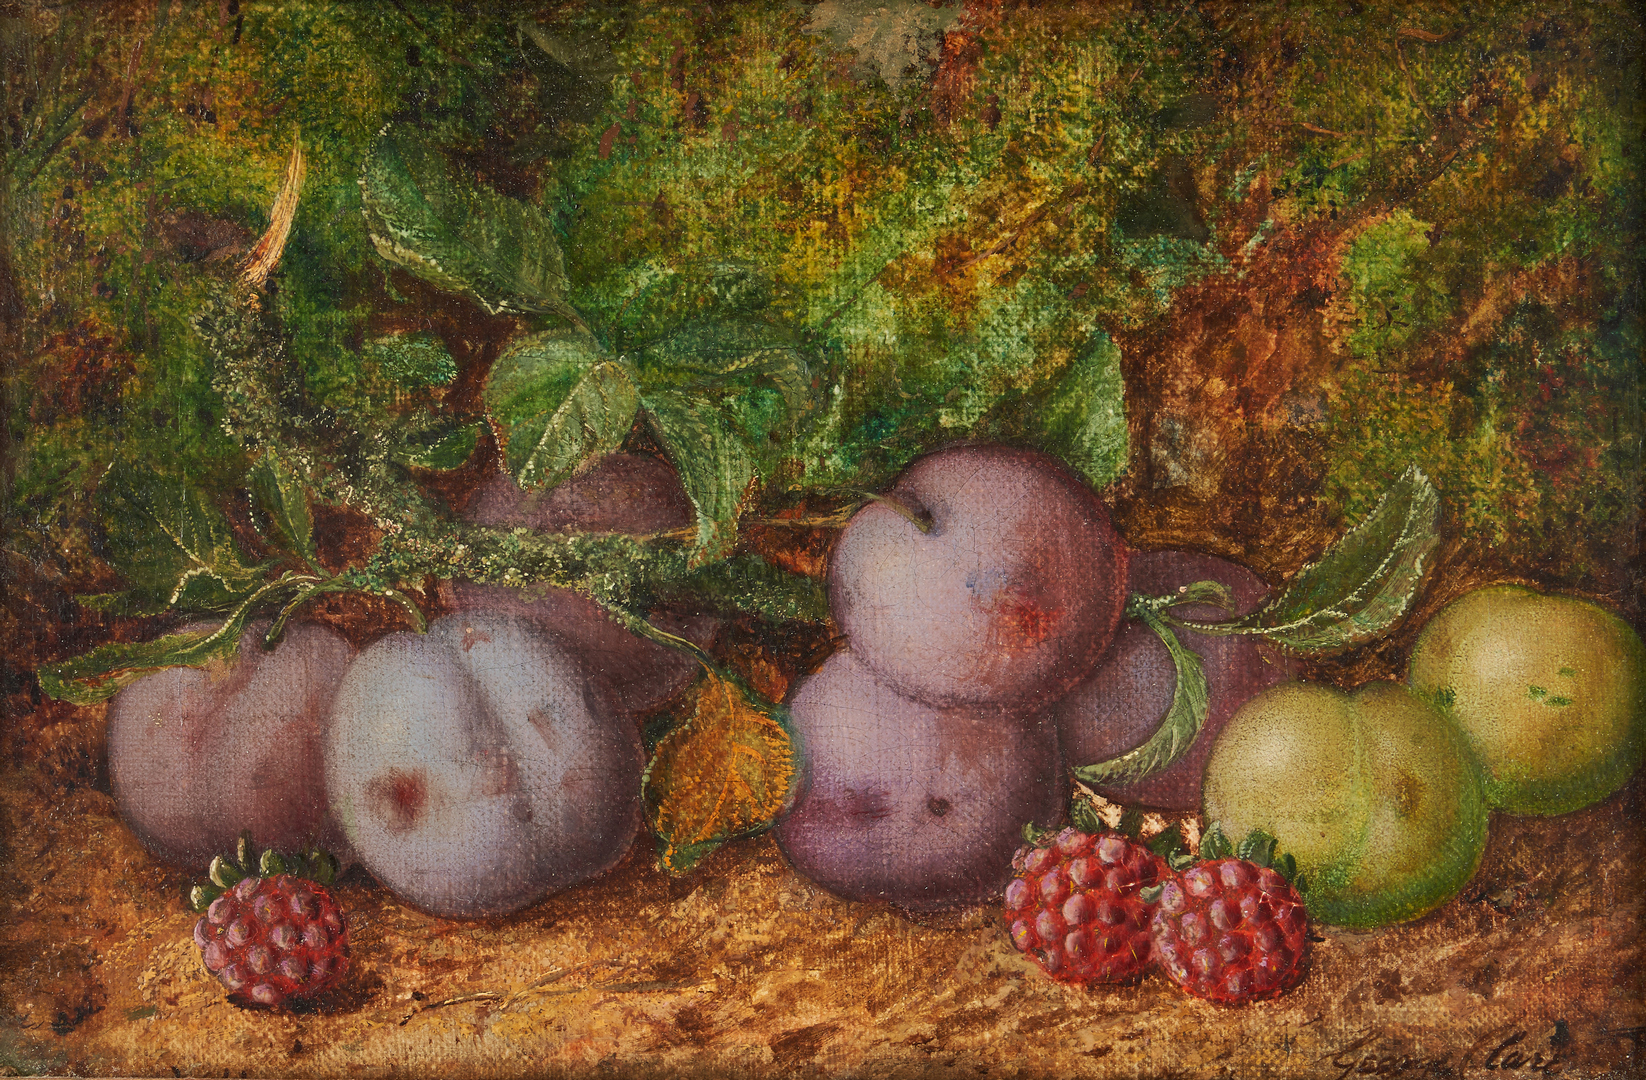 Lot 118: 3 English O/C Still Life Paintings, G. Clare